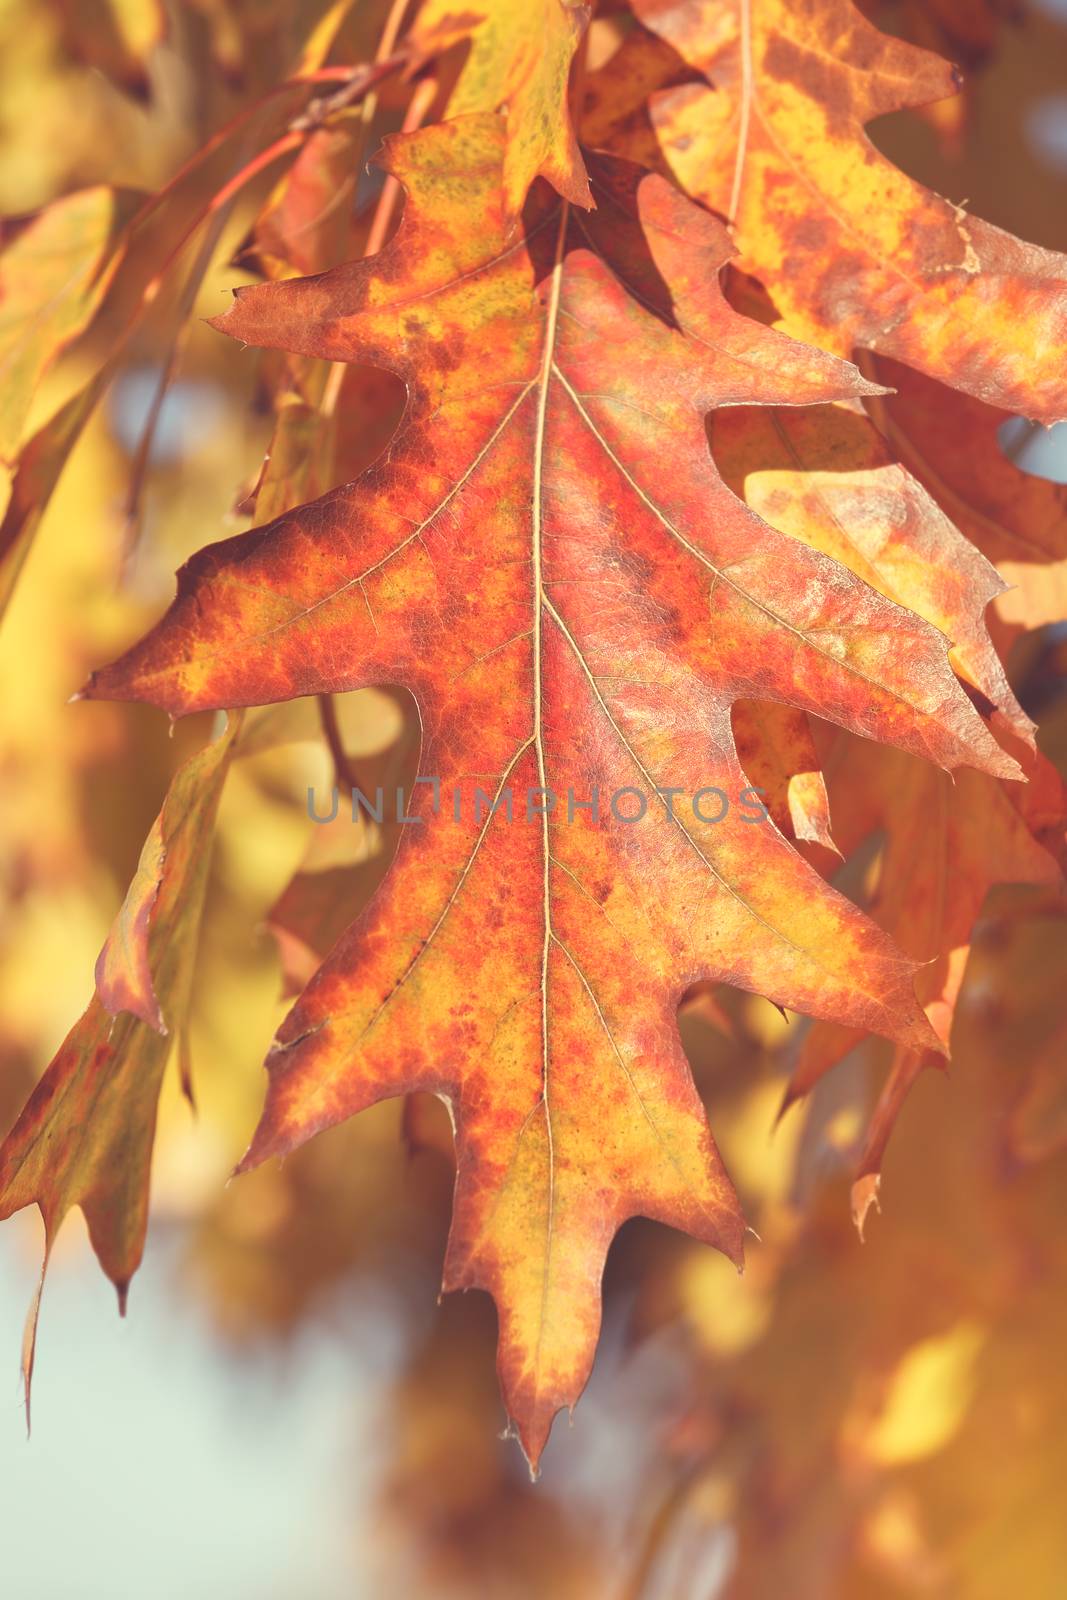 Autumn leaves on branches, close up by Slast20